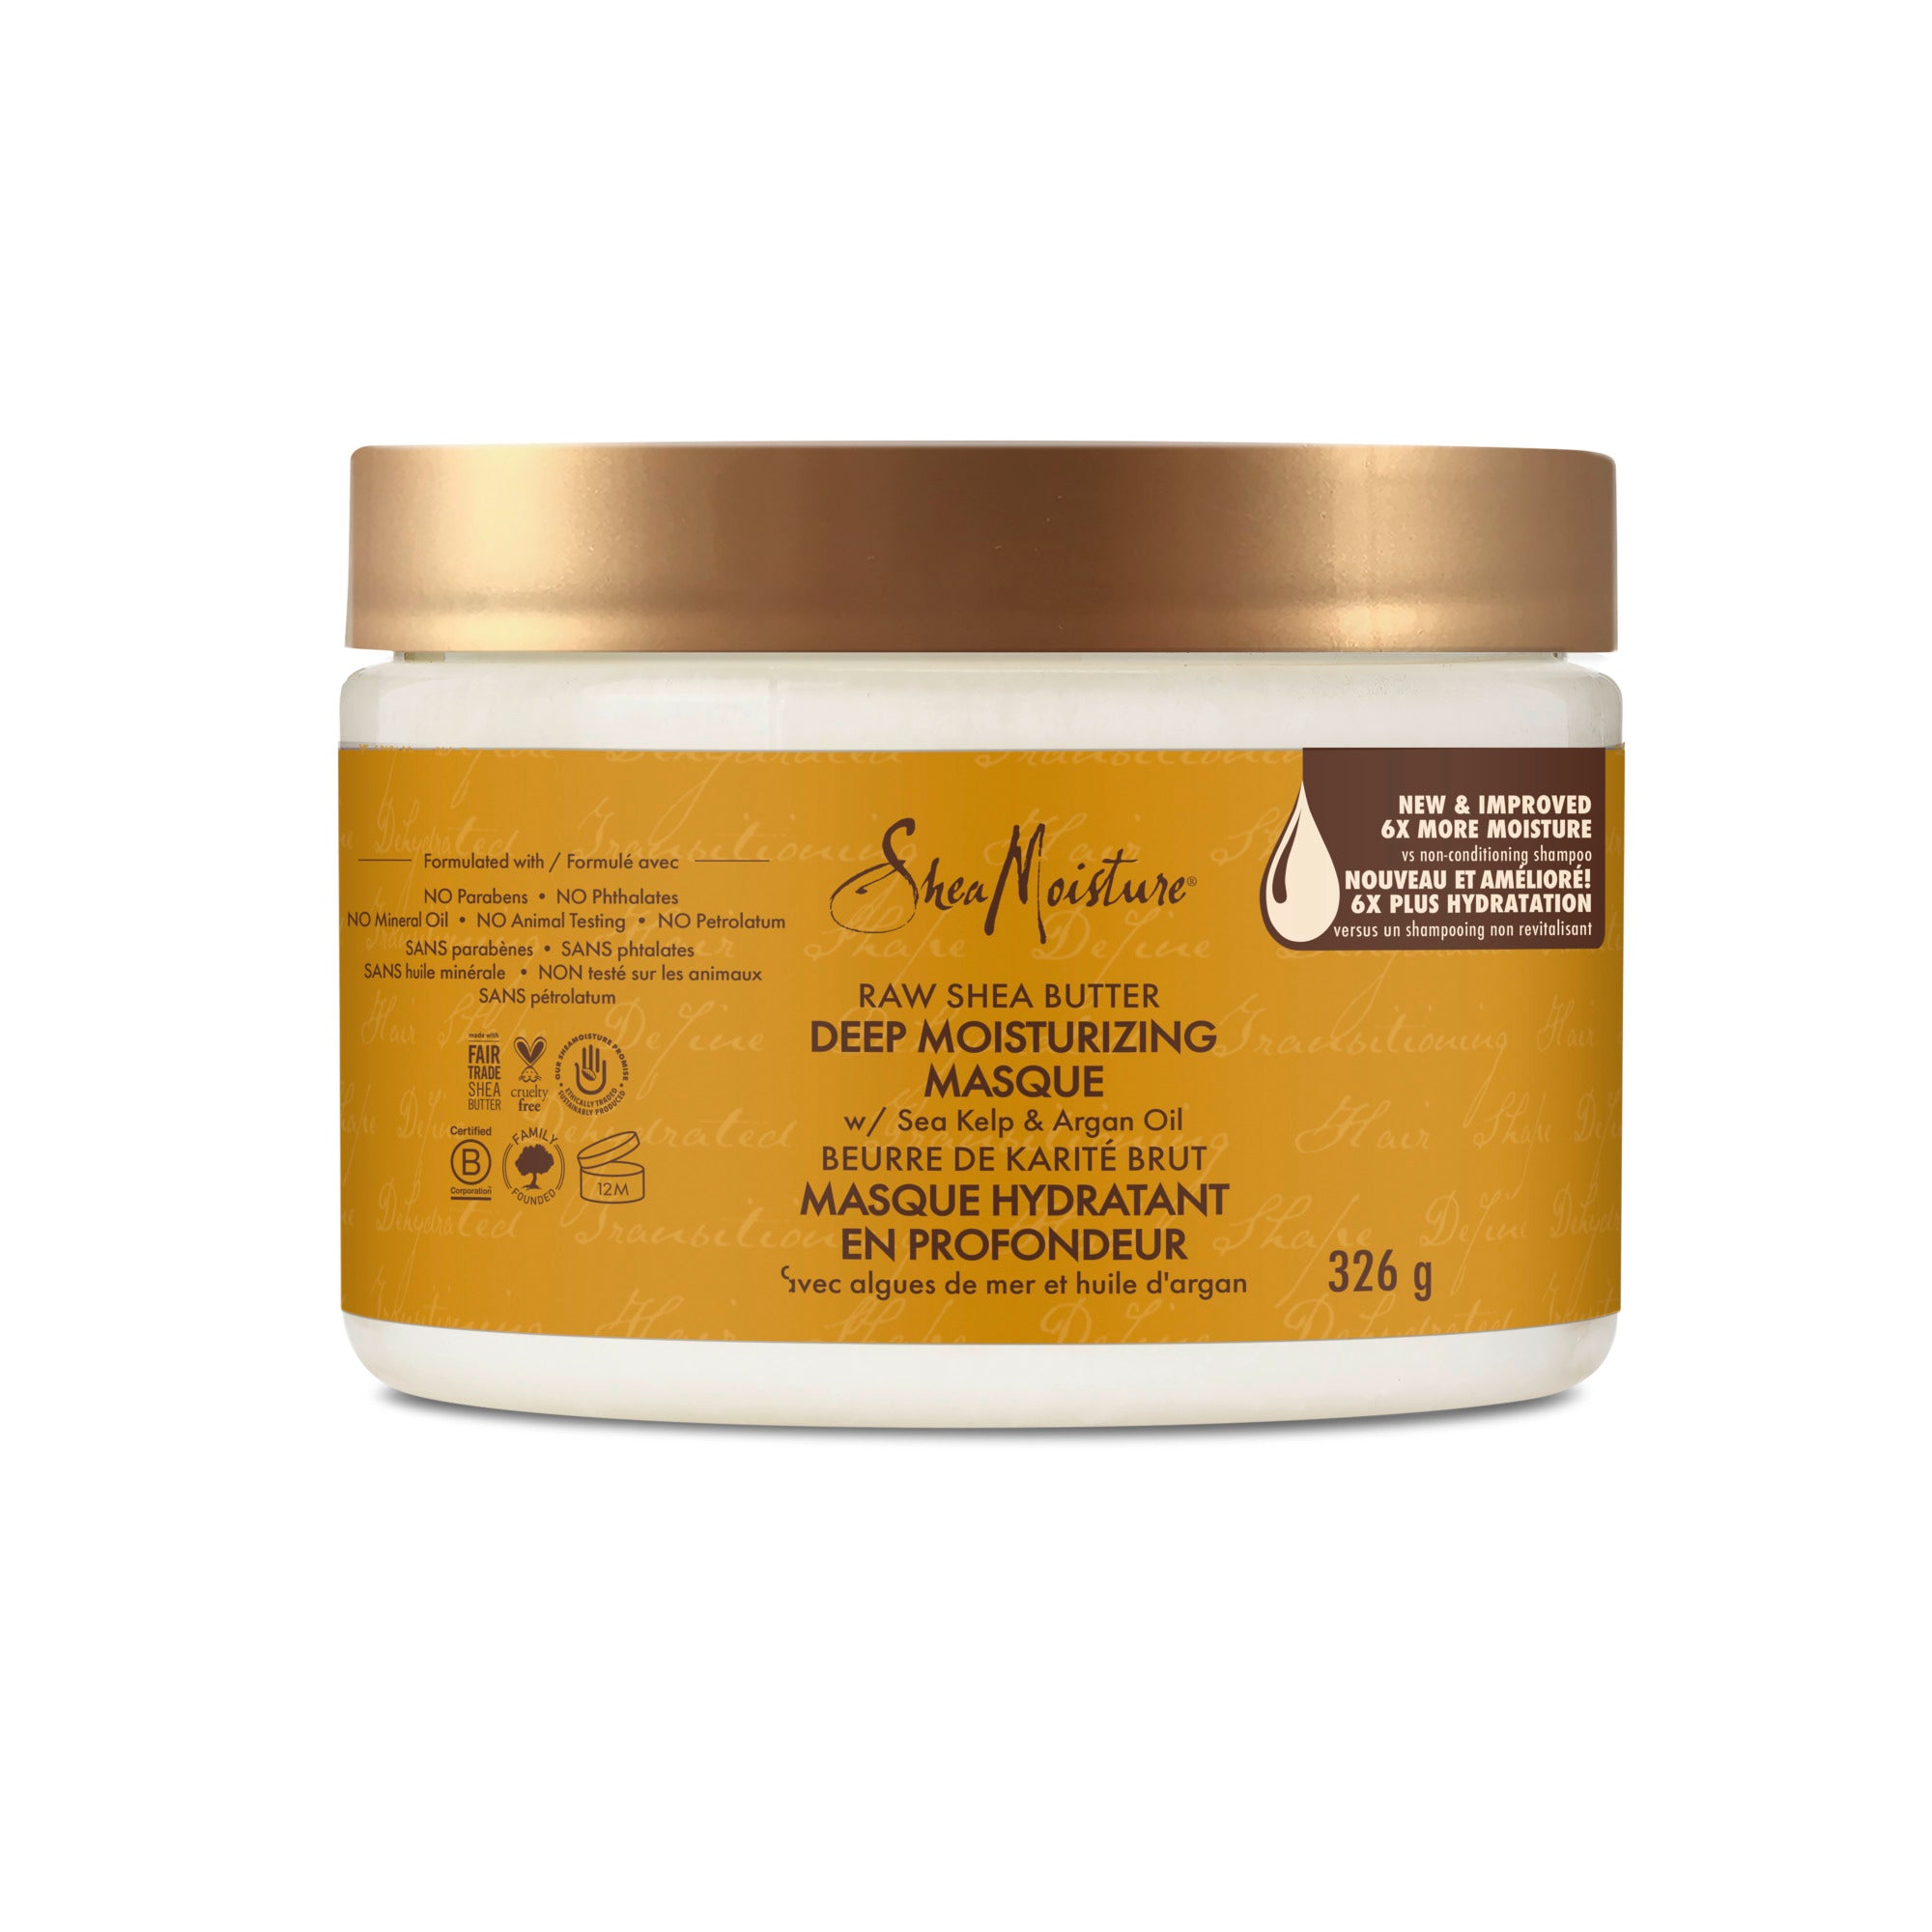 Showing the front angle view of the SheaMoisture Raw Shea Butter Hair Masque 326g product.